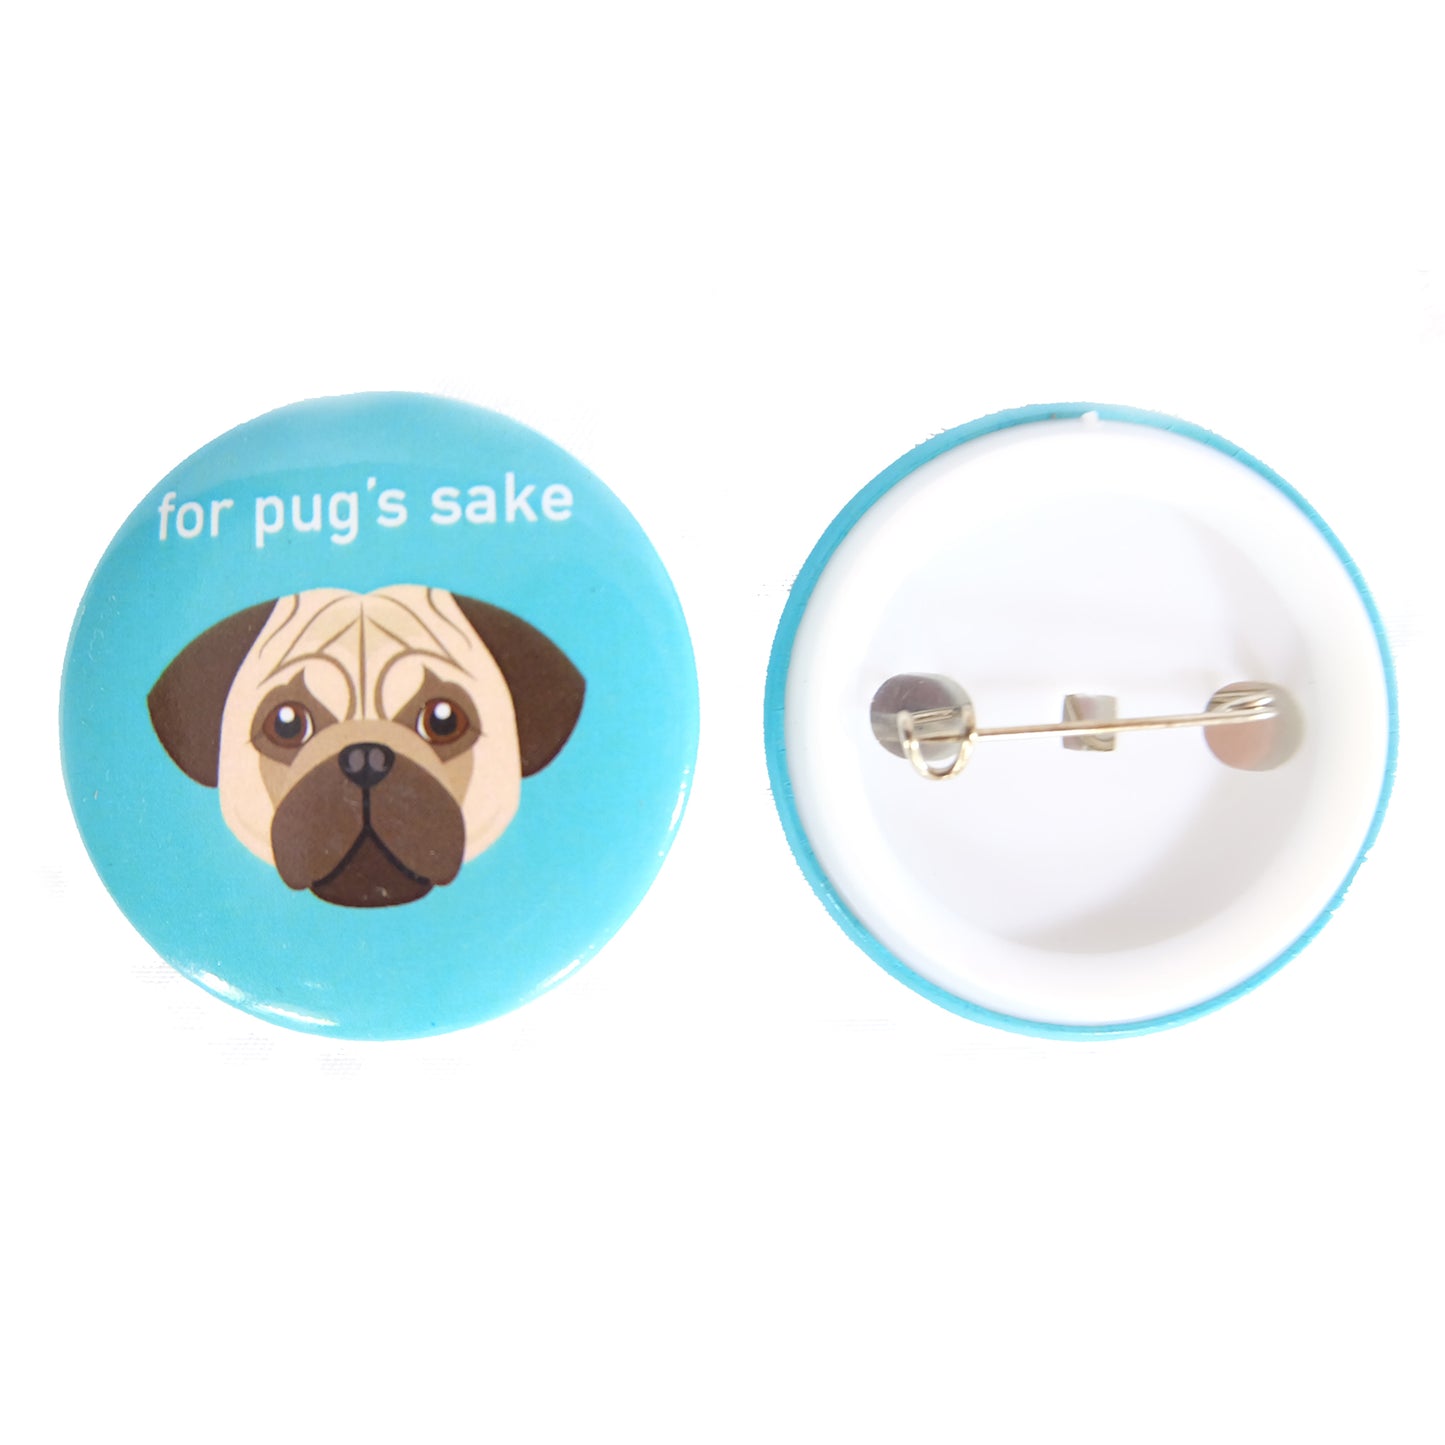 Dog Breed Button